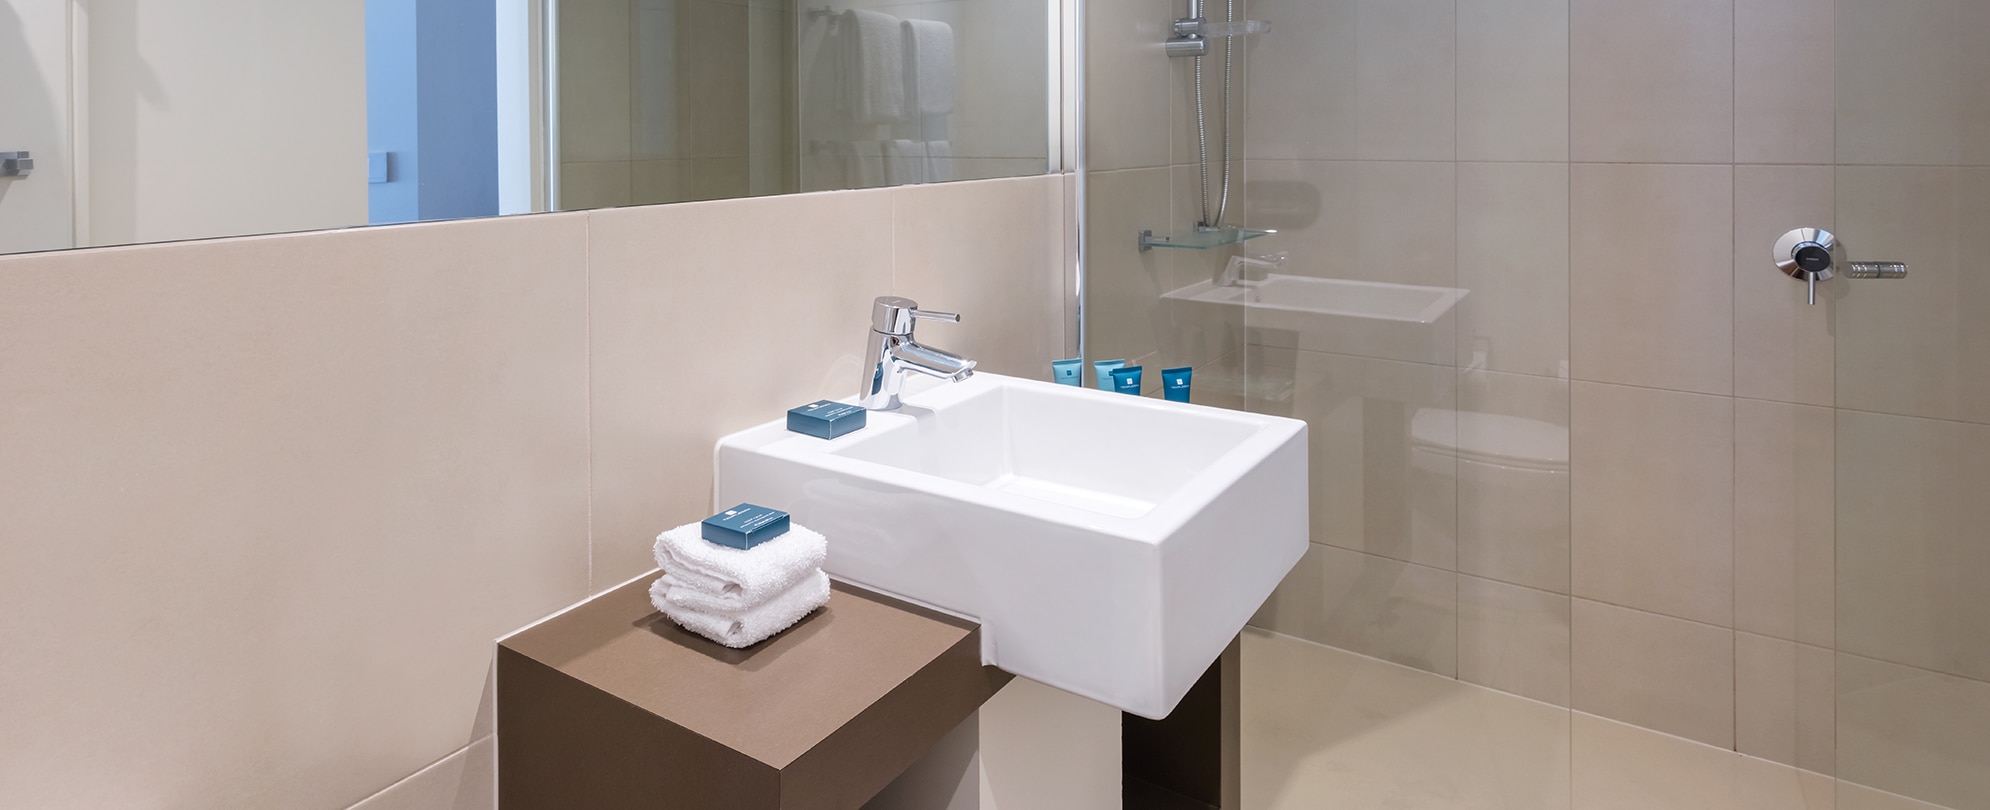 A modern sink, and walk-in shower, inside one of the suites at Club Wyndham Torquay.  